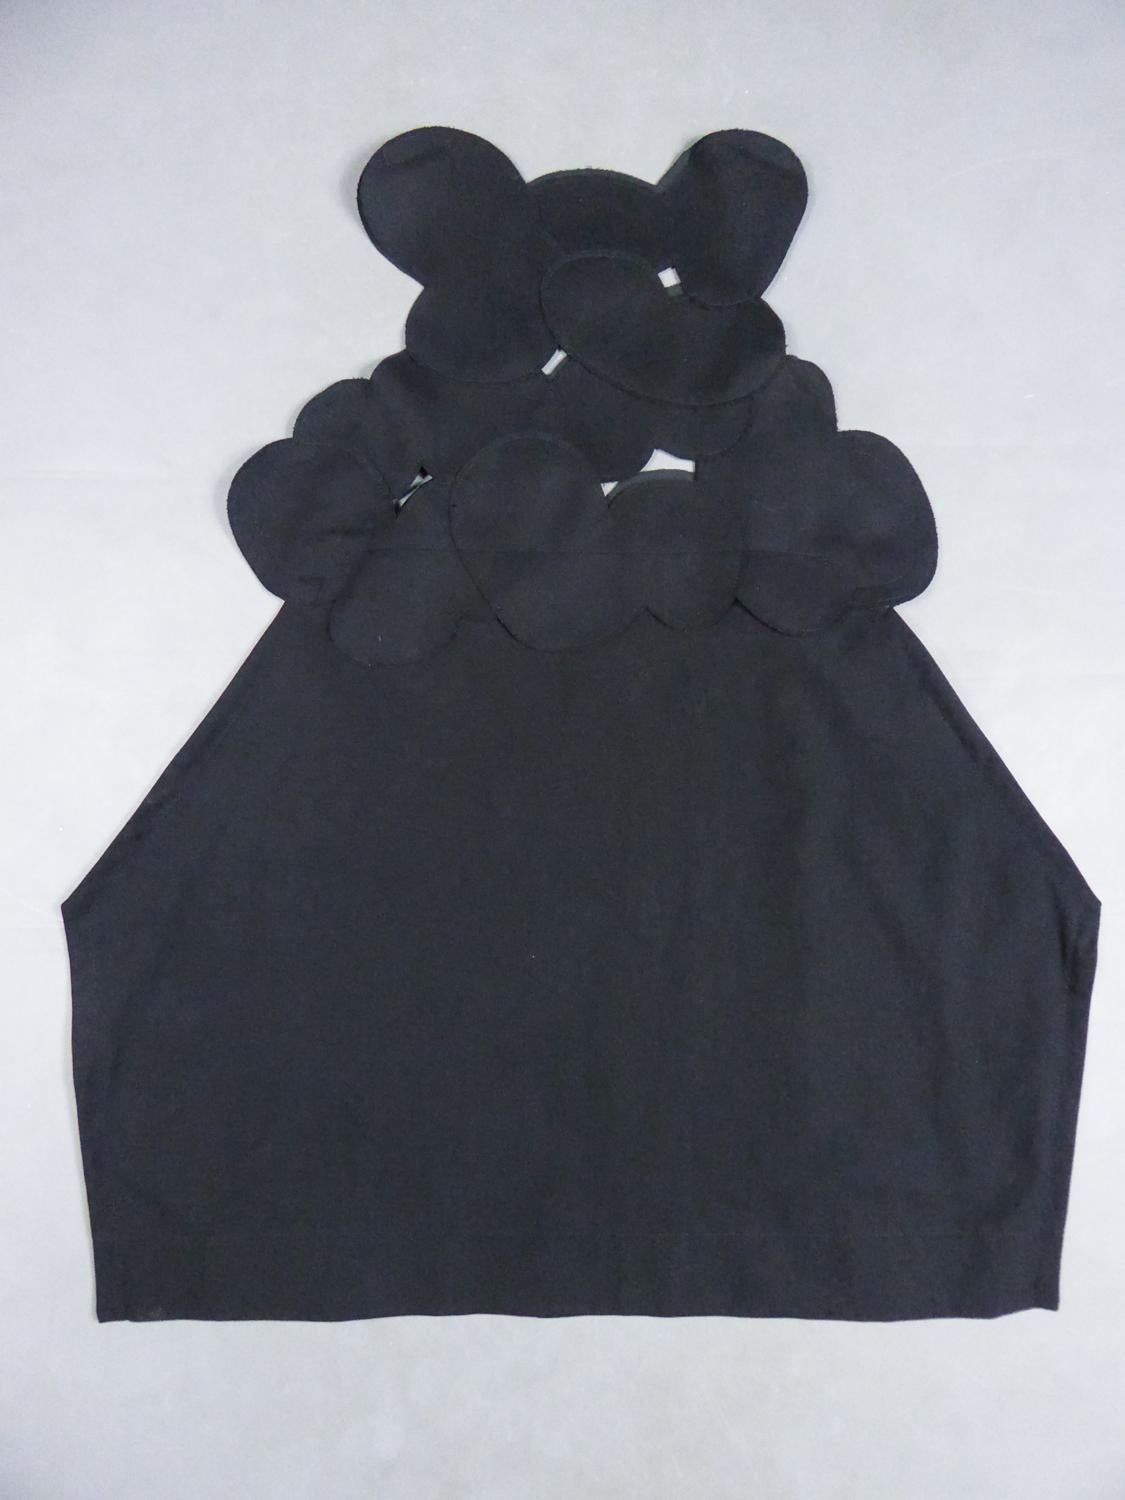 Circa 2000
France Japan

Iconic black chasuble dress by Comme des Garçons from the famous Japanese brand created by Rei Kawakubo. Master in the art of deconstruction in fashion, Junya Watanabe presents here an architectural and asymmetrical dress